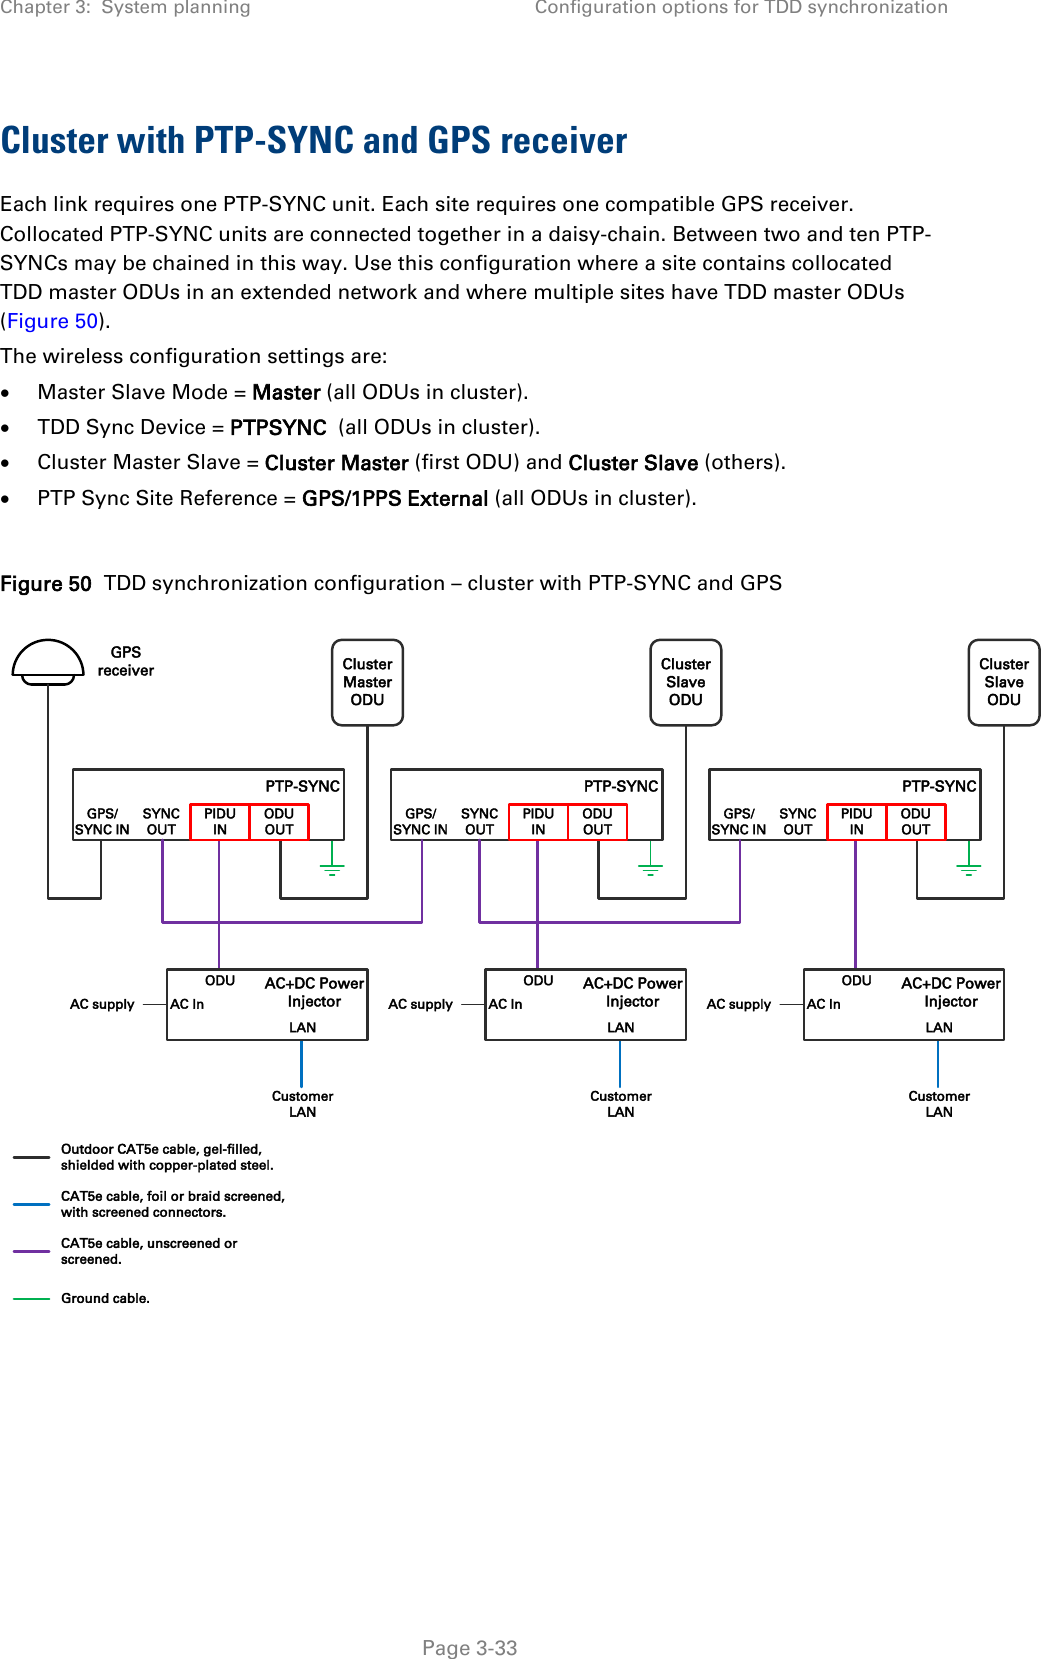 Chapter 3:  System planning Configuration options for TDD synchronization  Cluster with PTP-SYNC and GPS receiver Each link requires one PTP-SYNC unit. Each site requires one compatible GPS receiver. Collocated PTP-SYNC units are connected together in a daisy-chain. Between two and ten PTP-SYNCs may be chained in this way. Use this configuration where a site contains collocated TDD master ODUs in an extended network and where multiple sites have TDD master ODUs (Figure 50).  The wireless configuration settings are: • Master Slave Mode = Master (all ODUs in cluster). • TDD Sync Device = PTPSYNC  (all ODUs in cluster). • Cluster Master Slave = Cluster Master (first ODU) and Cluster Slave (others). • PTP Sync Site Reference = GPS/1PPS External (all ODUs in cluster).  Figure 50  TDD synchronization configuration – cluster with PTP-SYNC and GPS     ClusterMasterODUGPS receiverPTP-SYNCGPS/SYNC INSYNCOUTPIDUINODUOUTODULANAC+DC PowerInjectorAC InCustomerLANAC supplyOutdoor CAT5e cable, gel-filled, shielded with copper-plated steel.CAT5e cable, foil or braid screened, with screened connectors.CAT5e cable, unscreened or screened.Ground cable.ClusterSlaveODUPTP-SYNCGPS/SYNC INSYNCOUTPIDUINODUOUTODULANAC+DC PowerInjectorAC InCustomerLANAC supplyClusterSlaveODUPTP-SYNCGPS/SYNC INSYNCOUTPIDUINODUOUTODULANAC+DC PowerInjectorAC InCustomerLANAC supply Page 3-33 